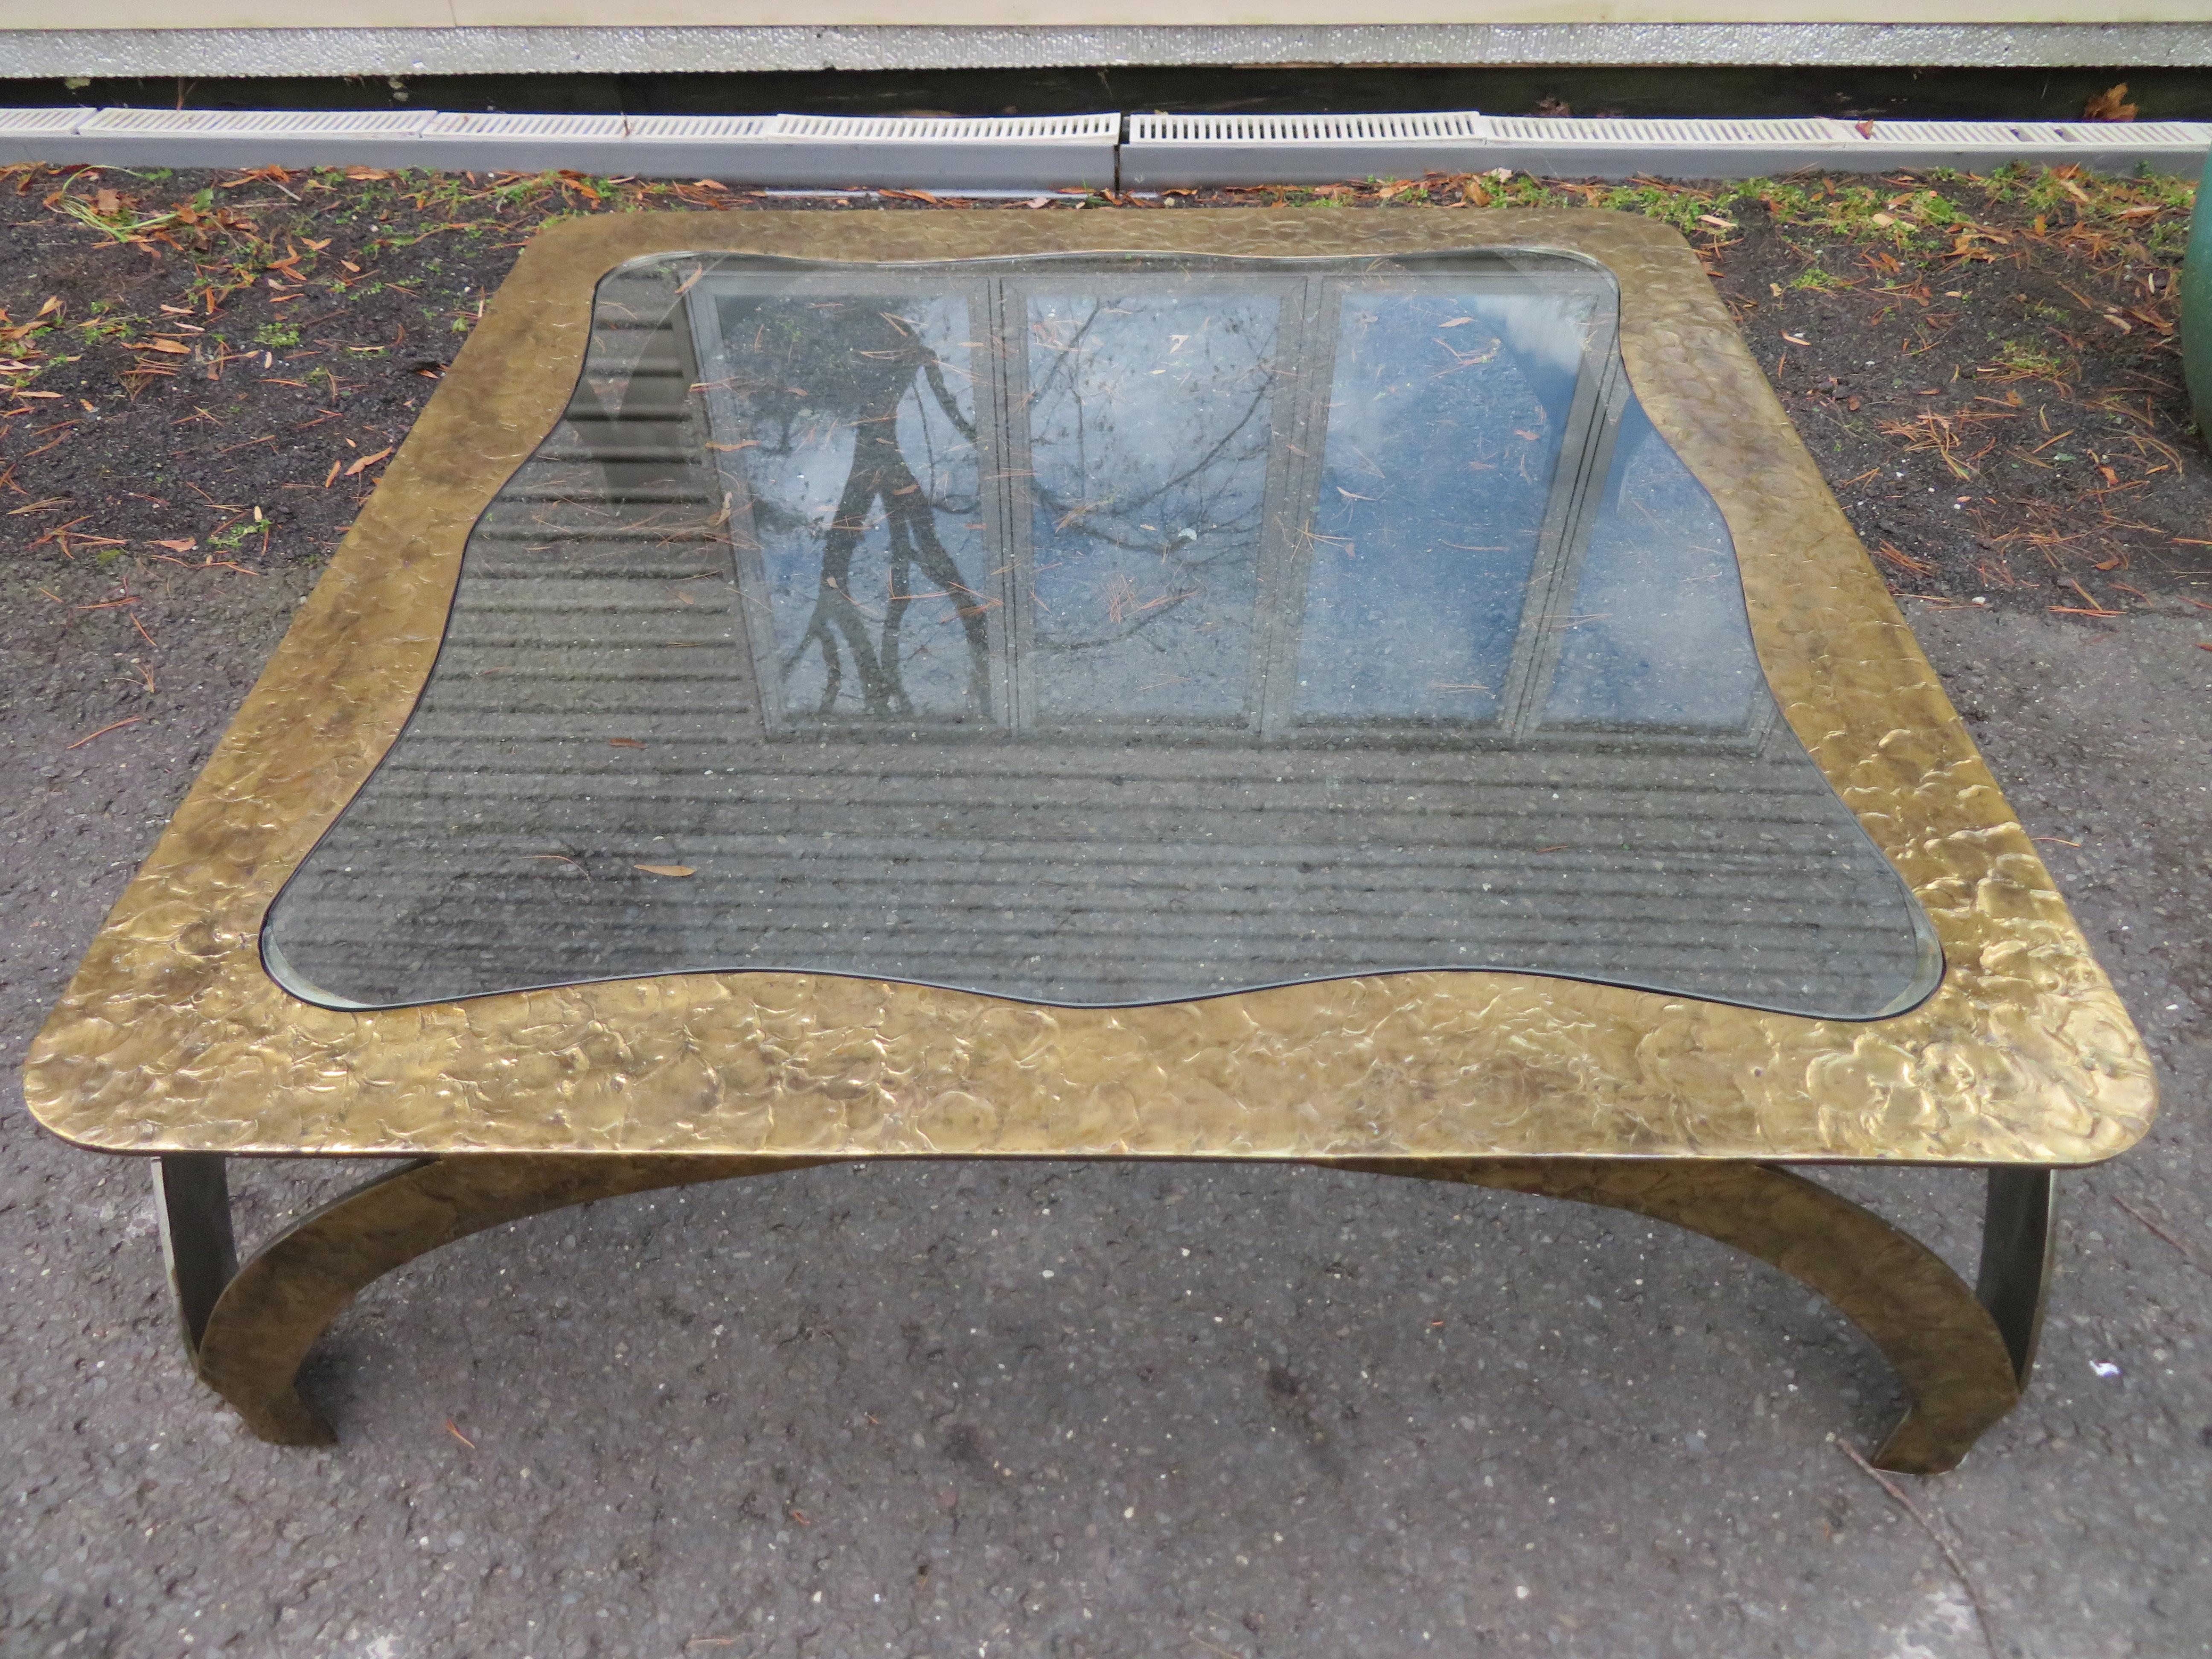 A large square textural bronze coffee table with an inset glass top by Silas Seandel. This wonderful table measures 15.5